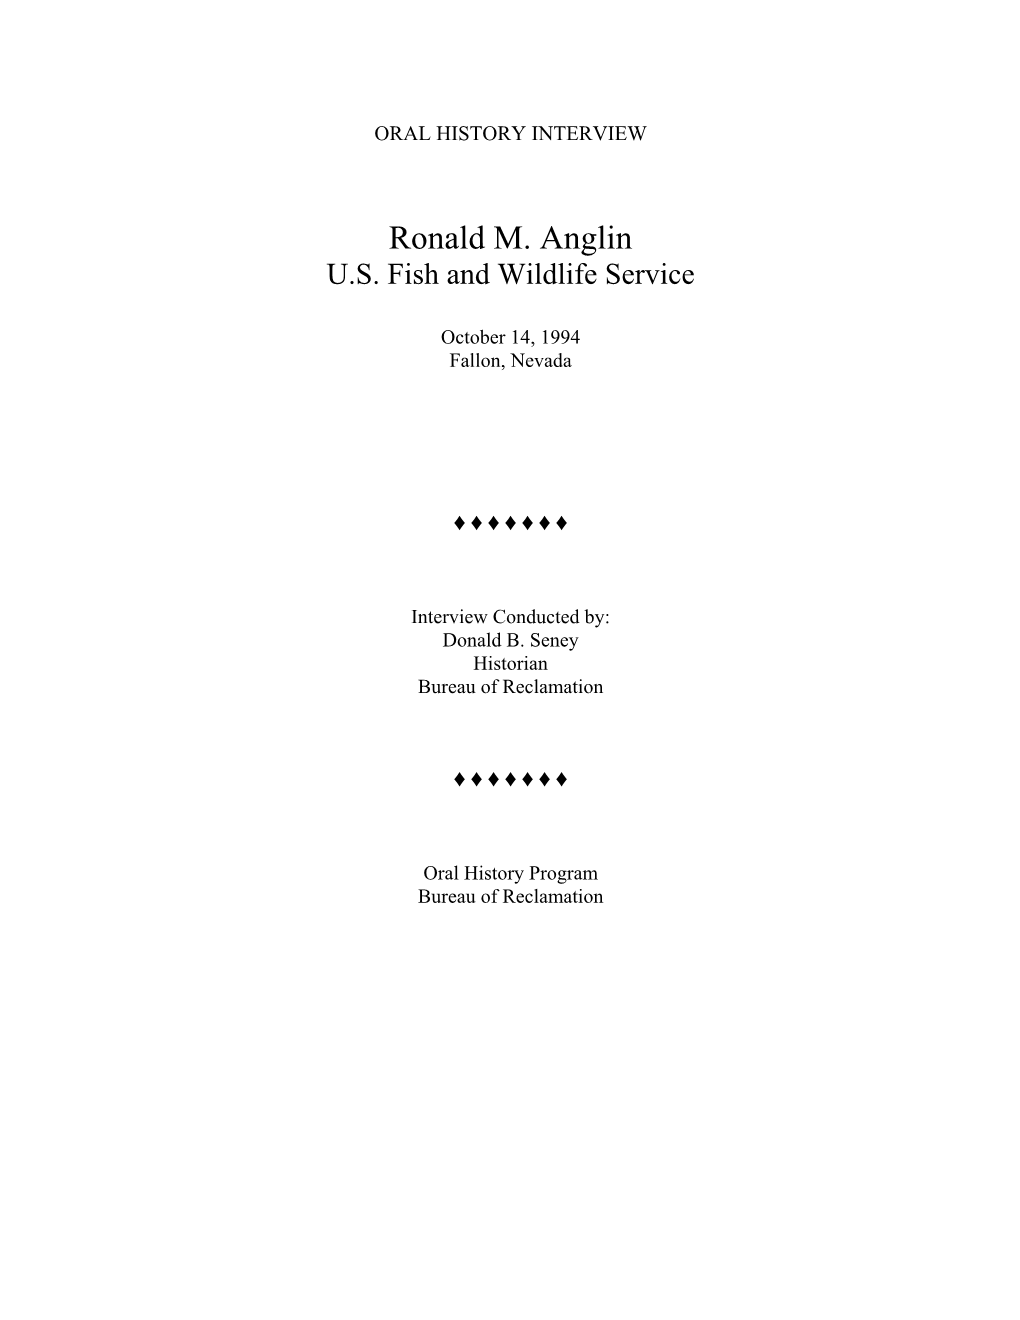 Anglin, Ronald M. ORAL HISTORY INTERVIEW